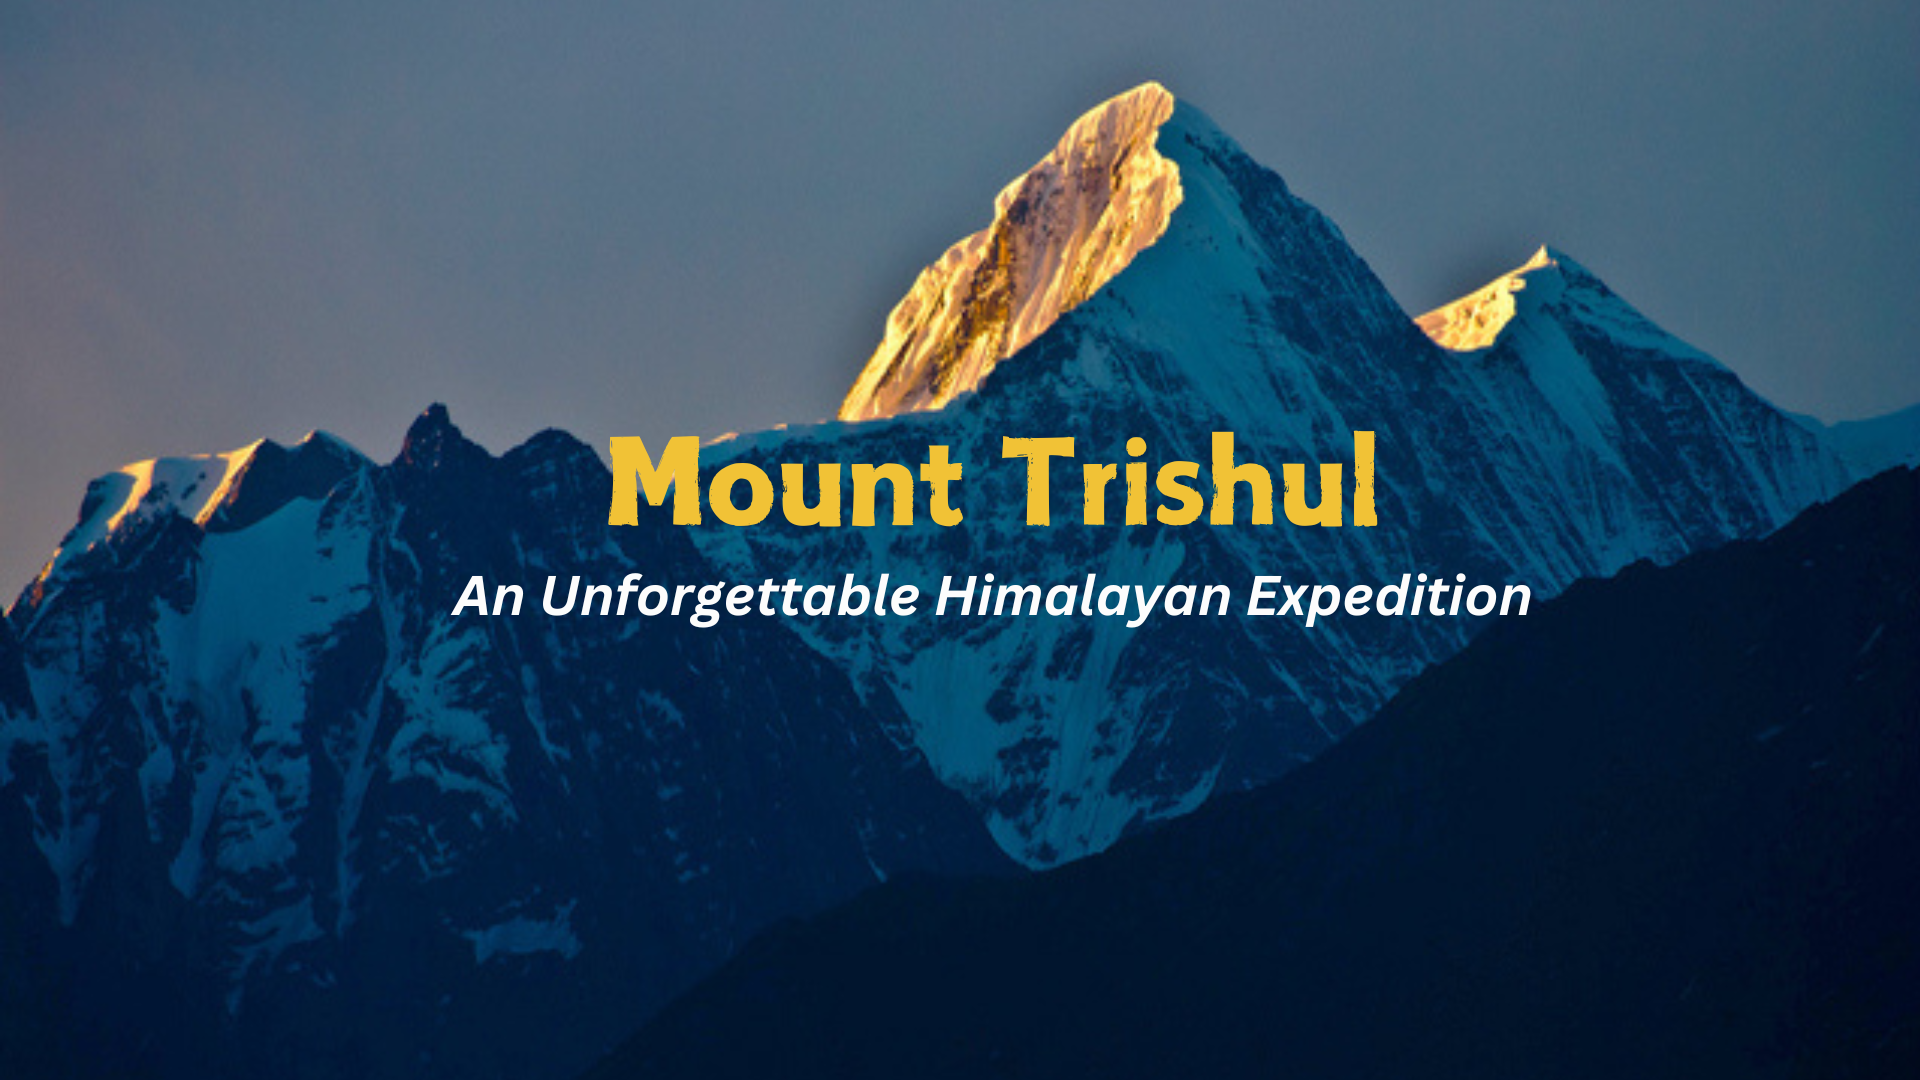 Mount Trishul: An Unforgettable Himalayan Expedition